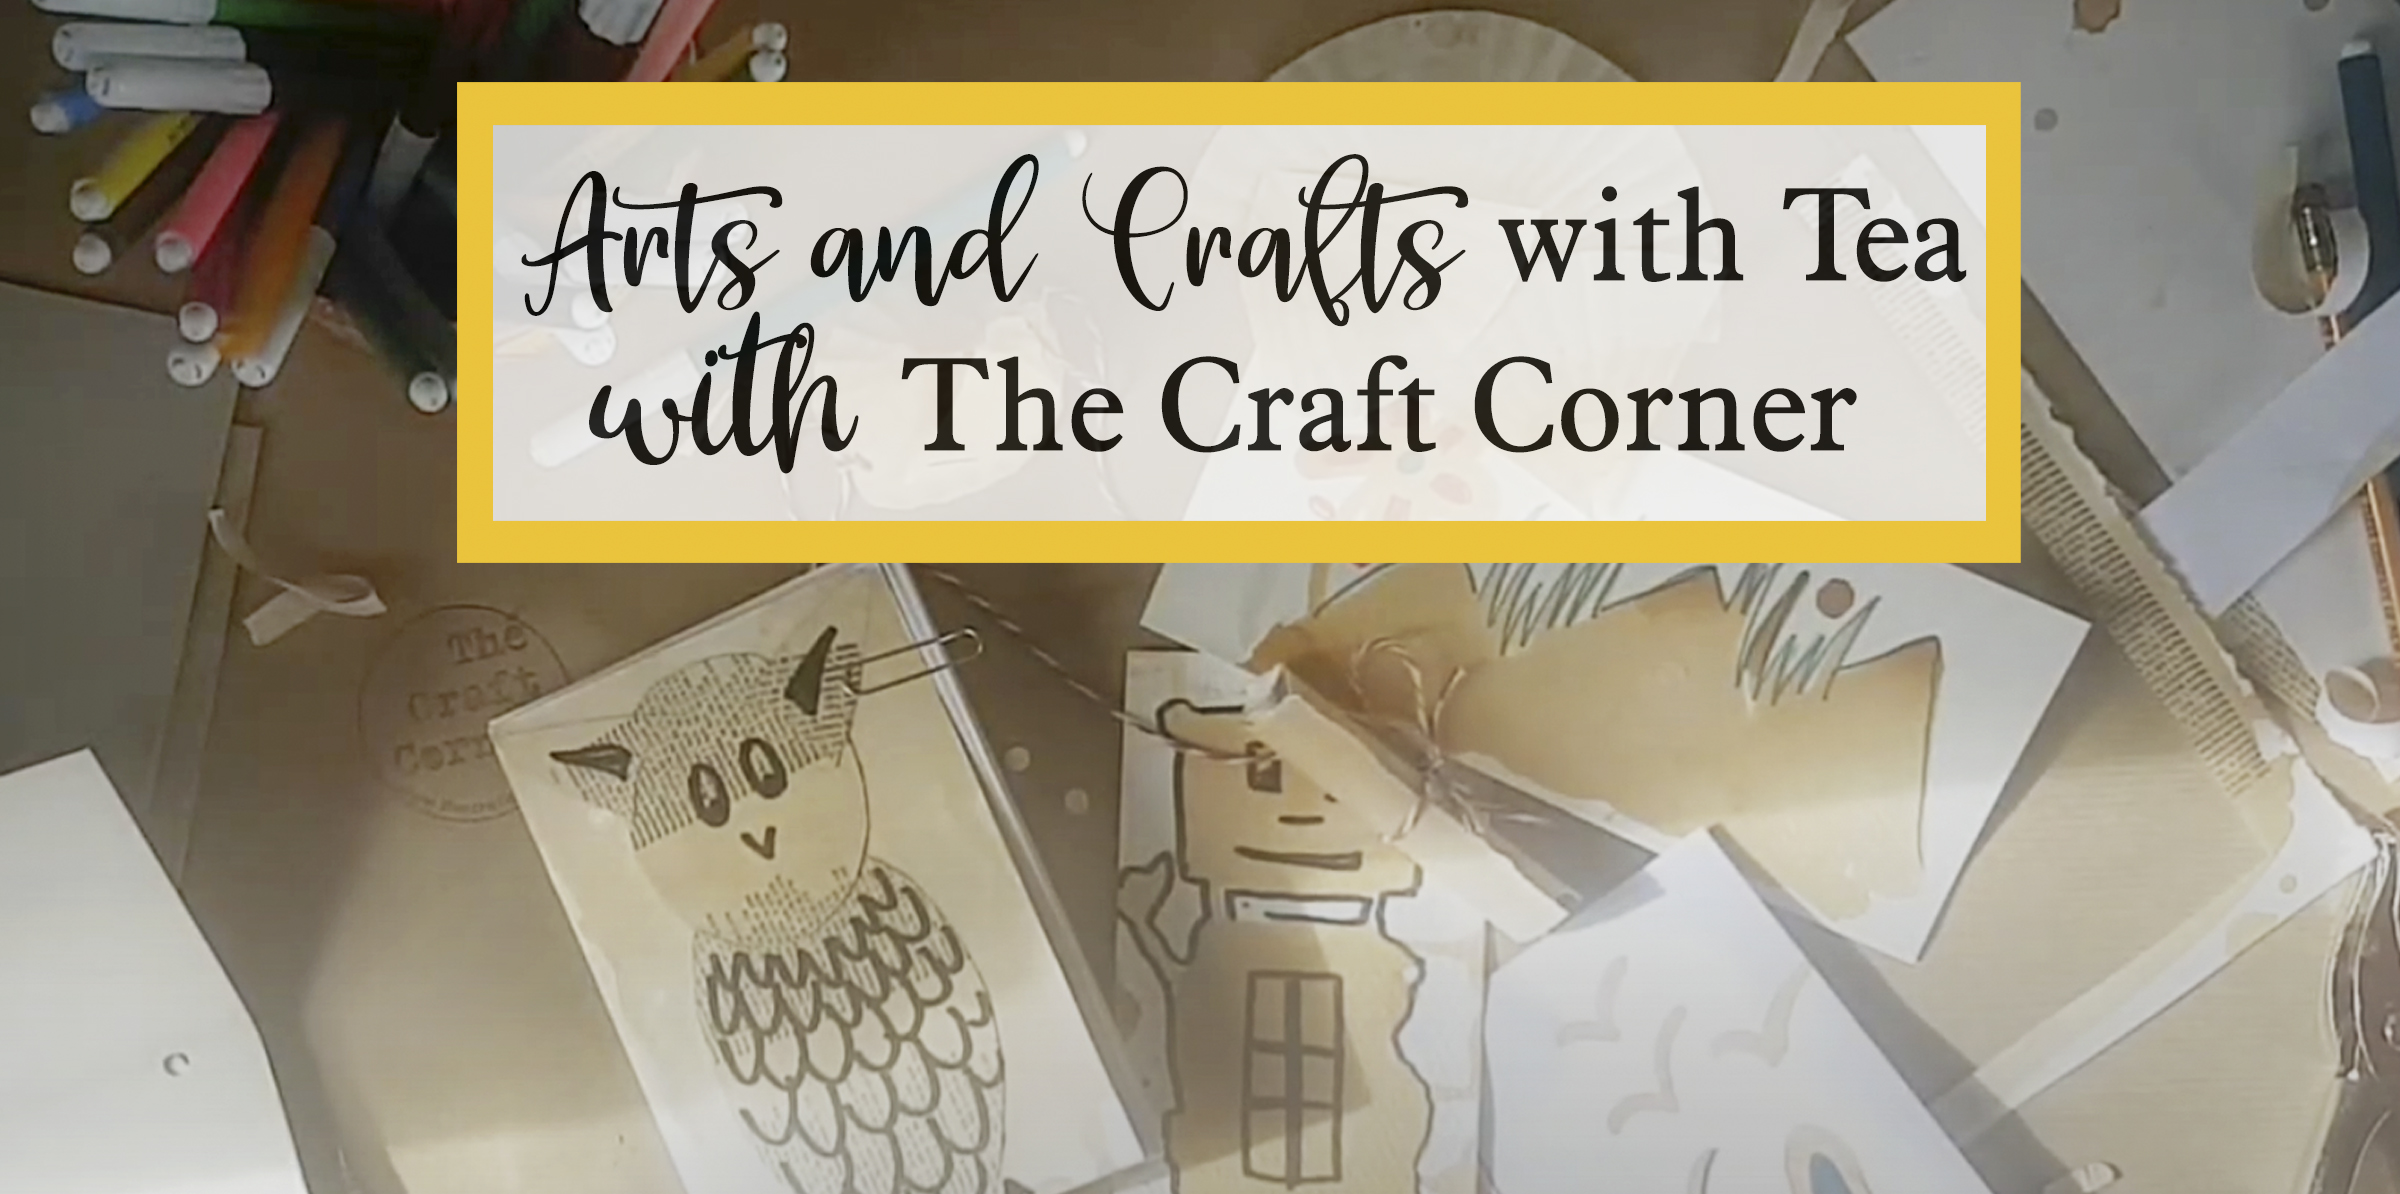 Arts and Crafts with Tea - with The Craft Corner